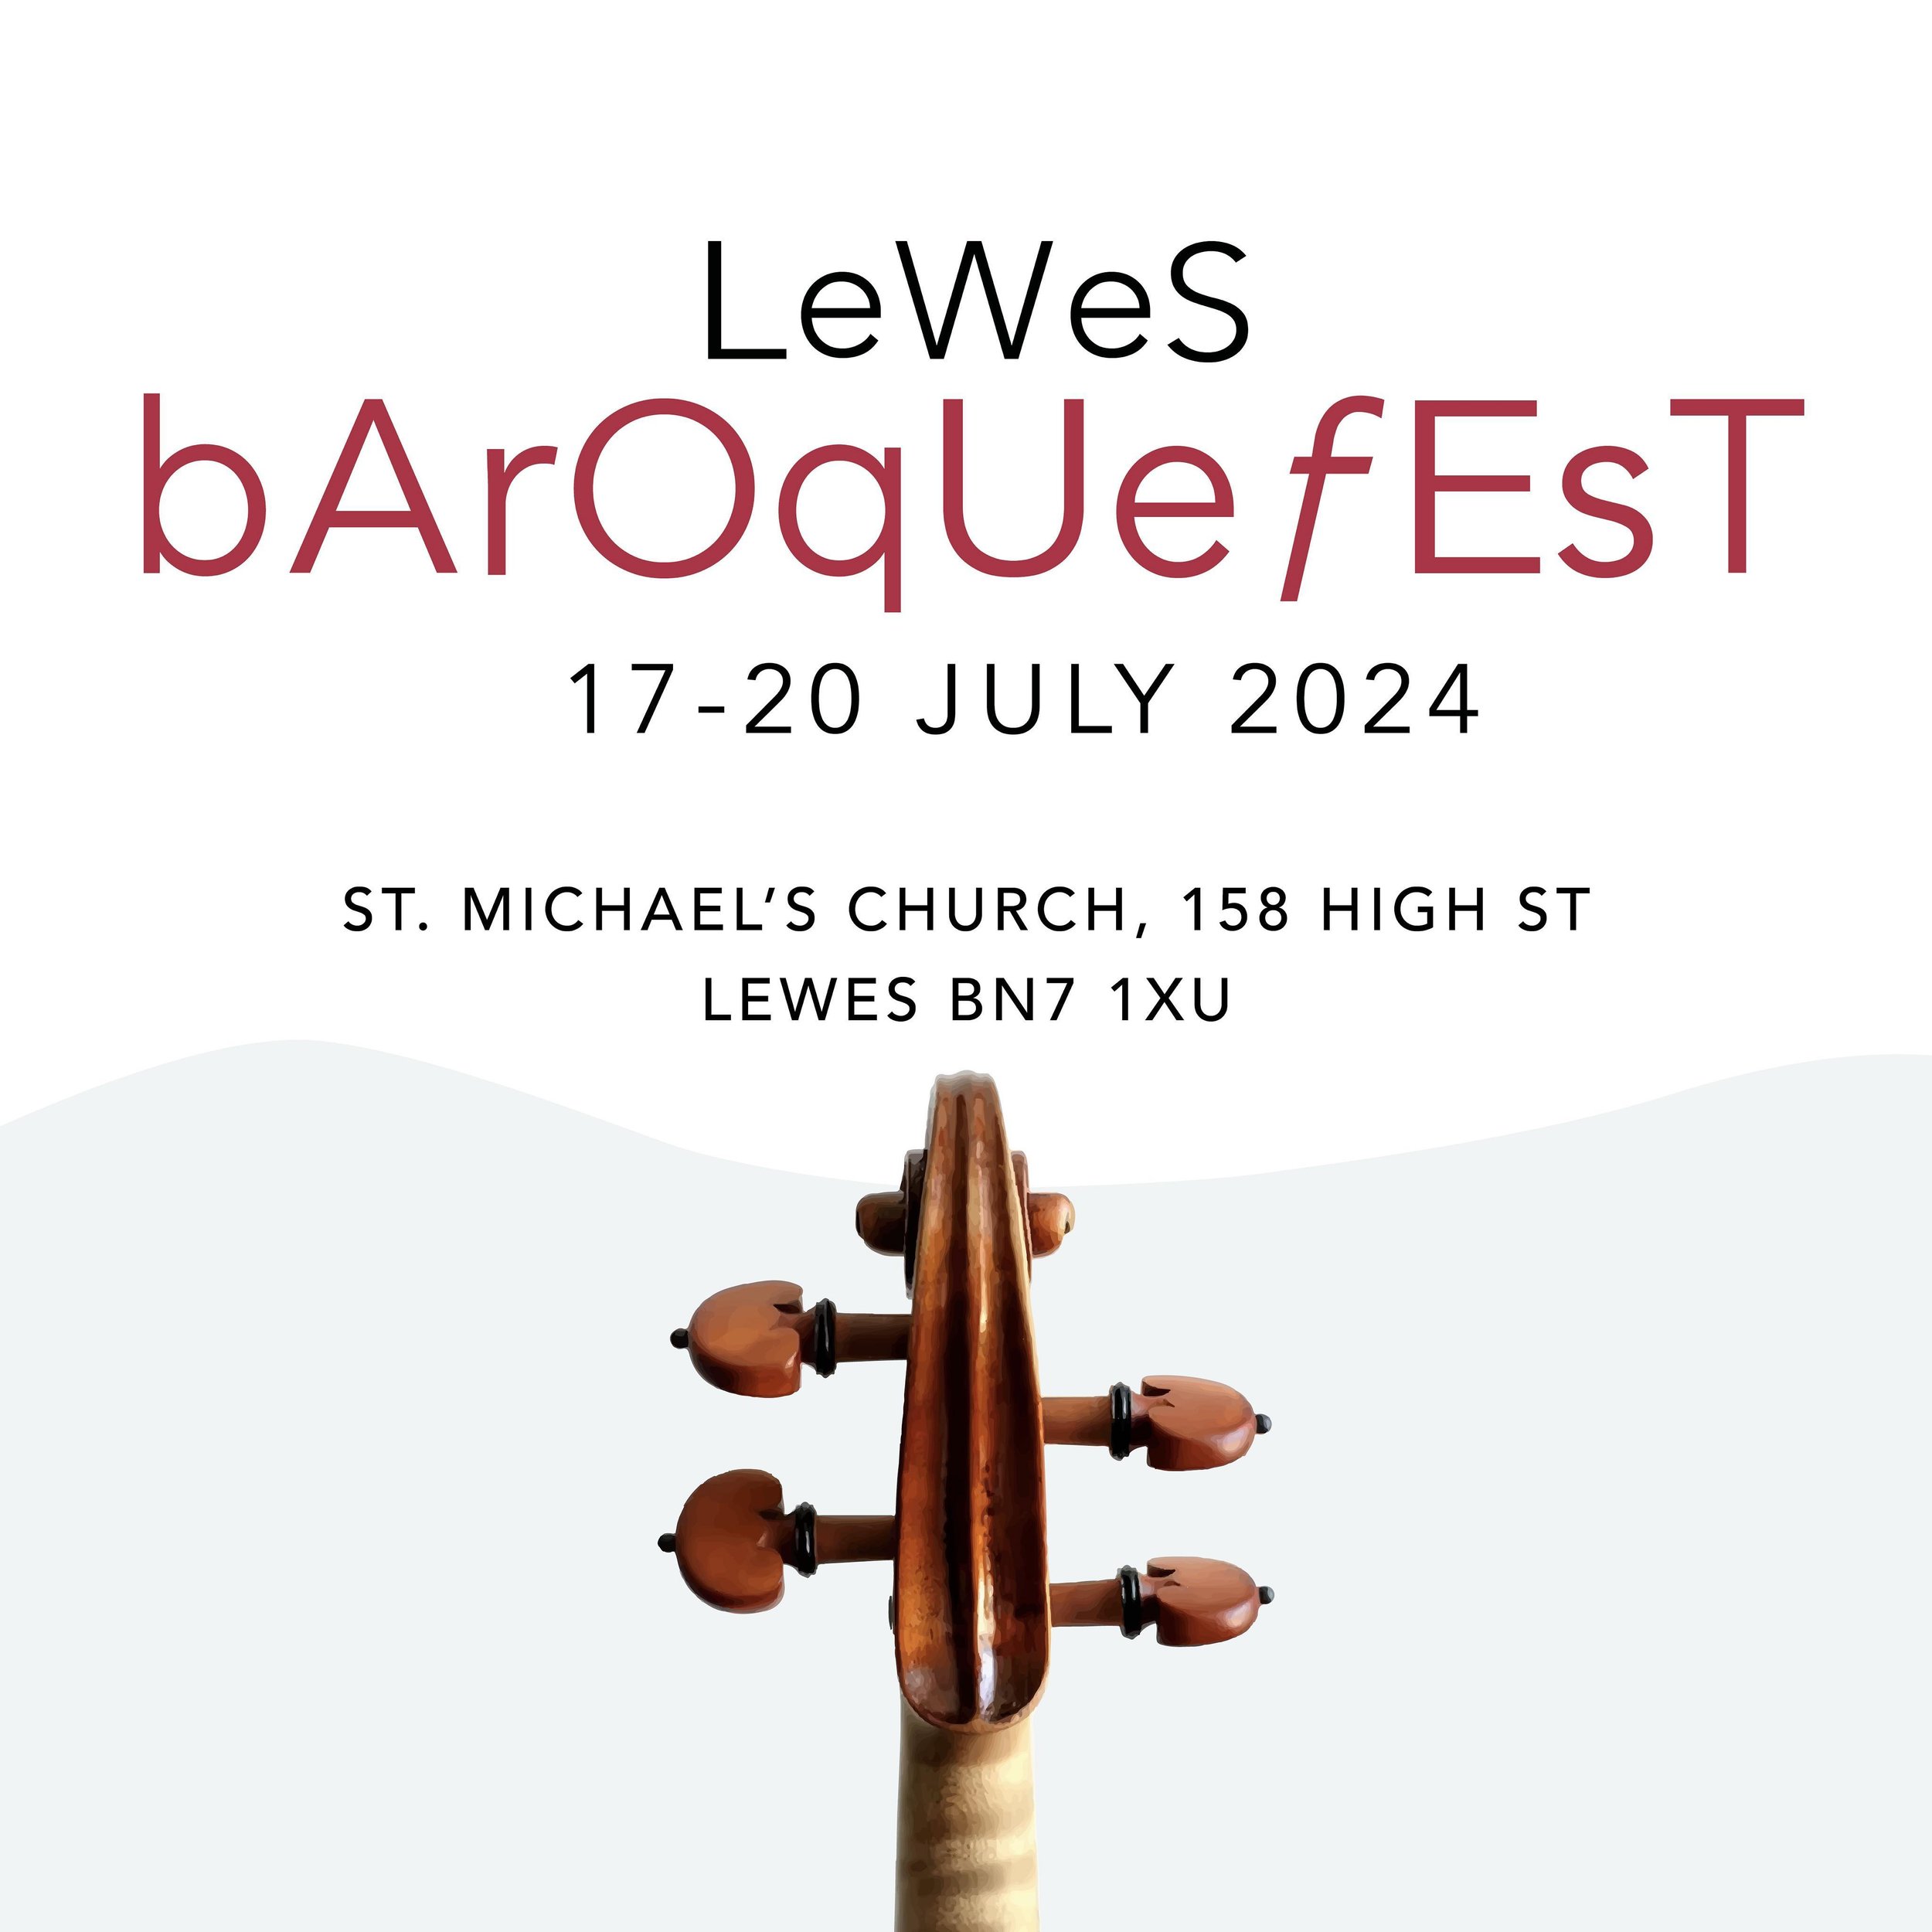 Did you know we&rsquo;re appearing in this year&rsquo;s Lewes Baroque Fest? Join us on 20th July at 7pm for Bach&rsquo;s Mass in B Minor, performing alongside The Baroque Collective and The Baroque Collective Singers!

John Hancorn (conductor)
Alexan